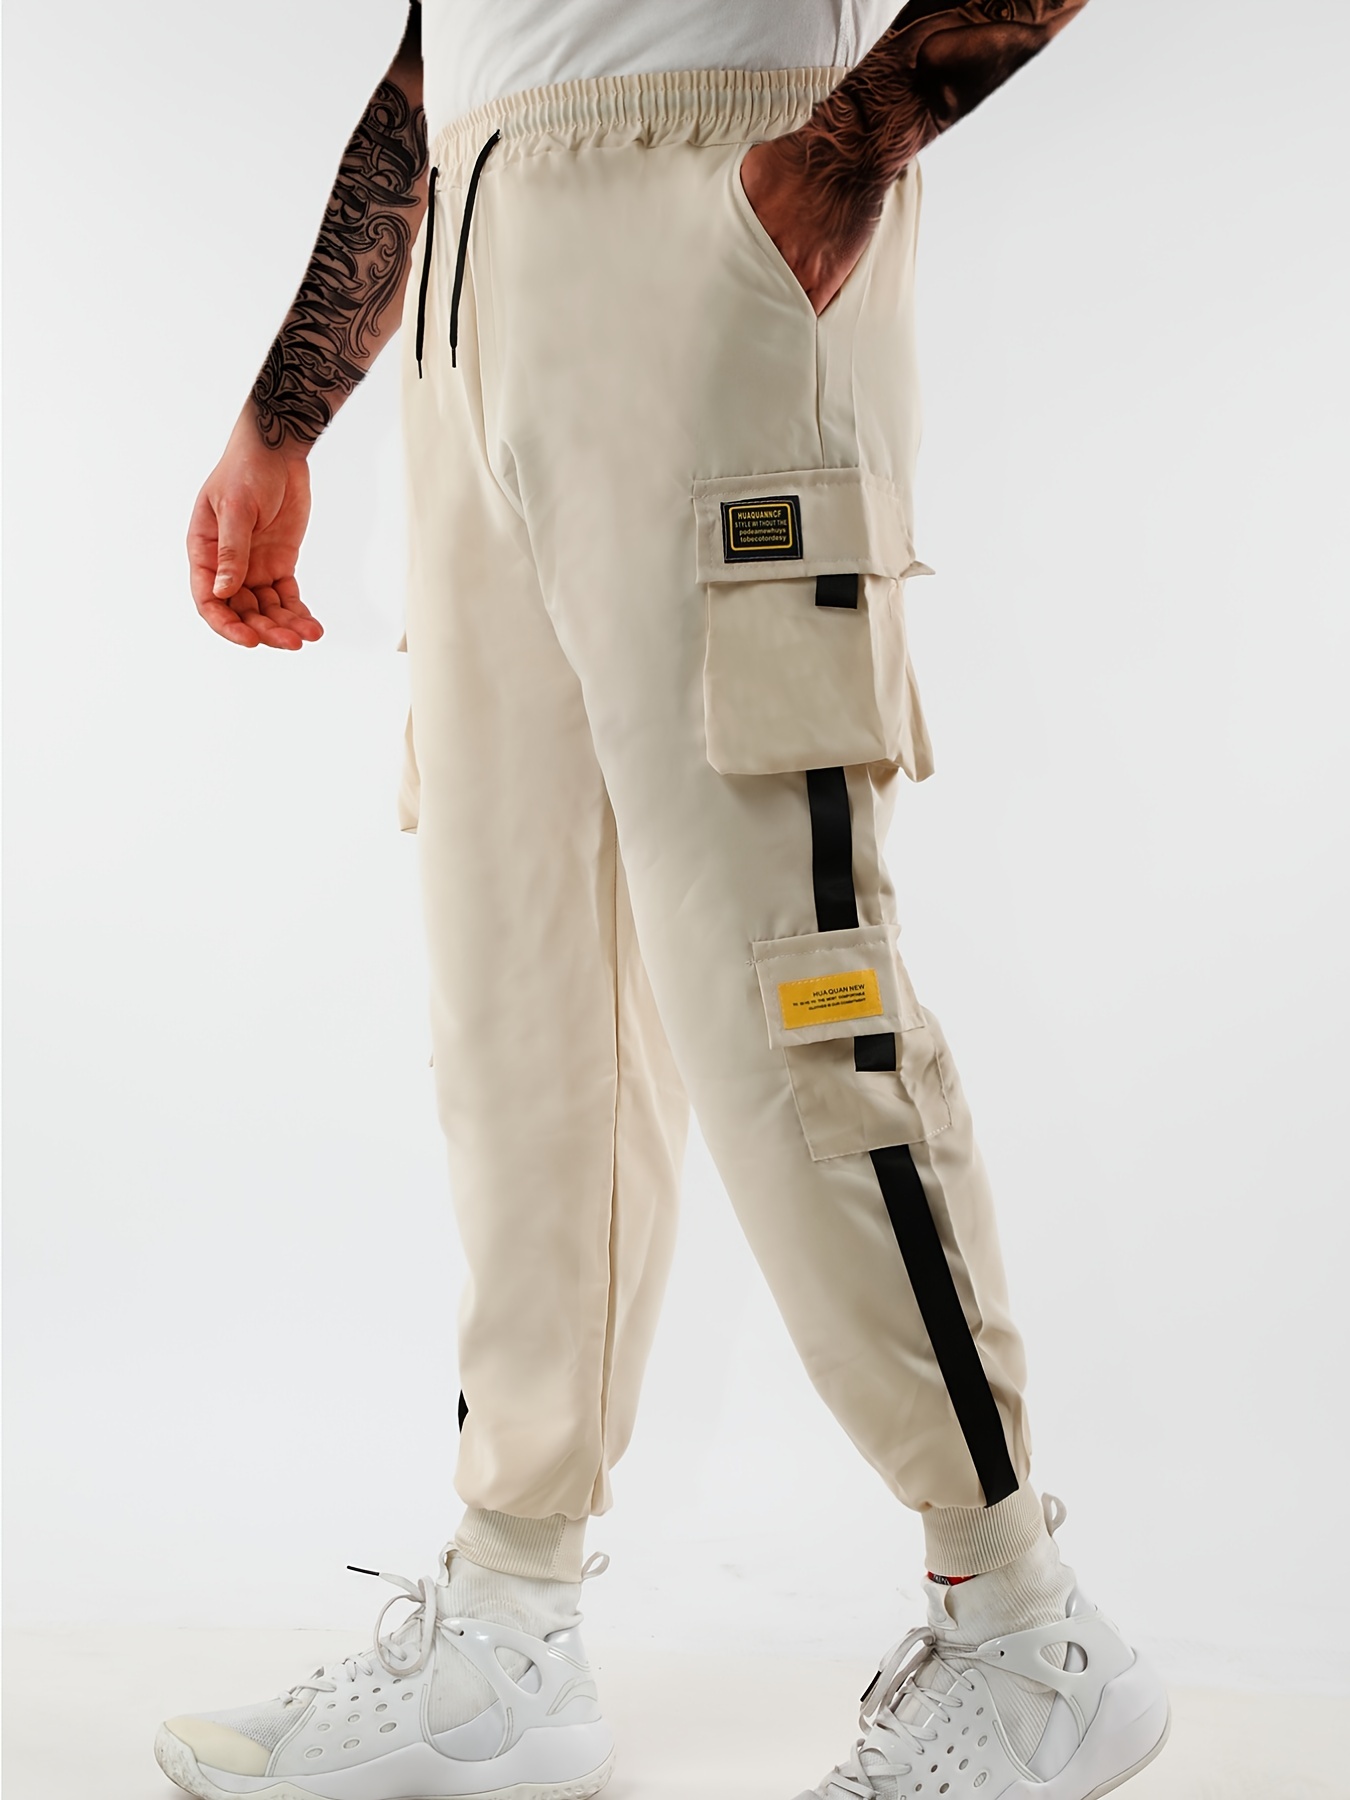 old design technical trousers